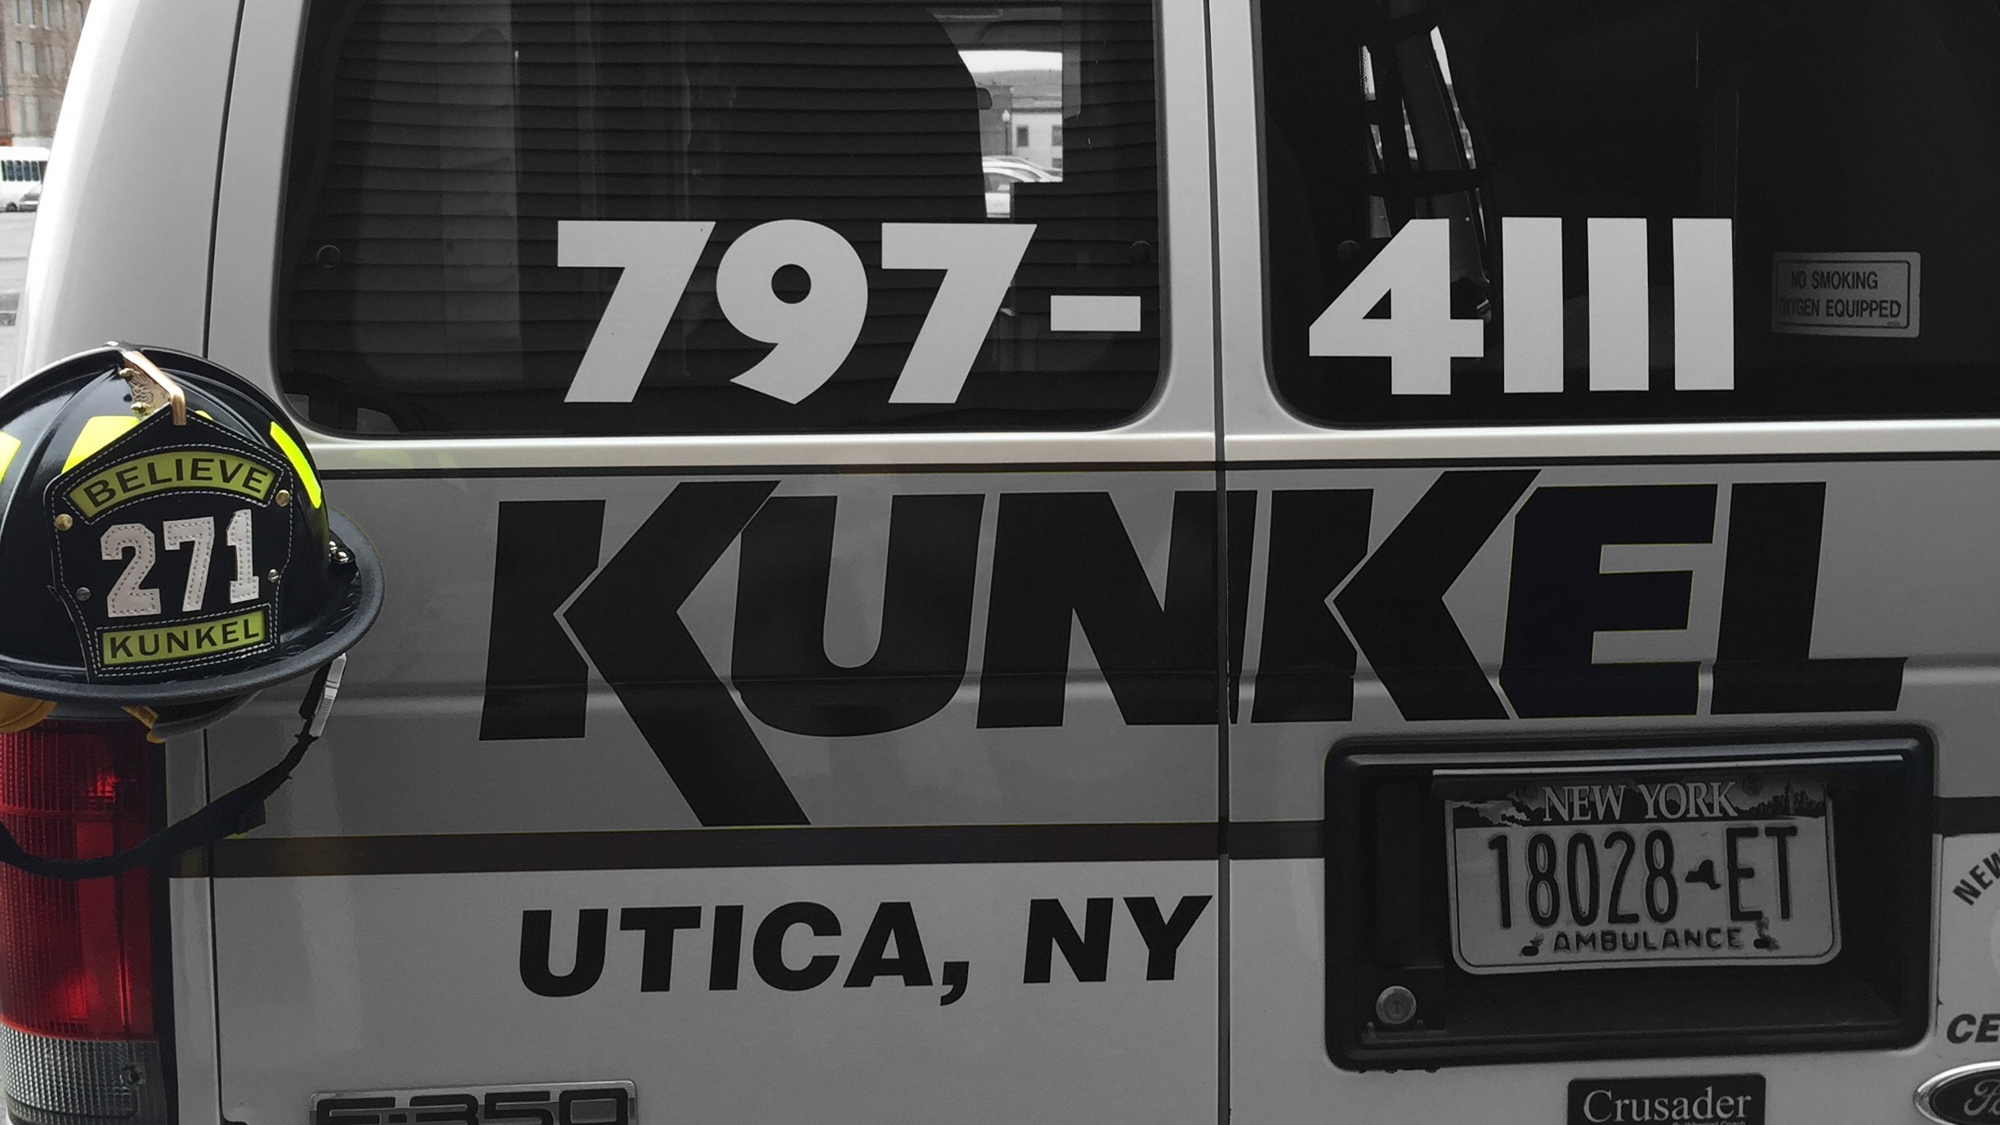 Featured image for “PRIORITY AMBULANCE TO PURCHASE KUNKEL AMBULANCE IN NEW YORK”